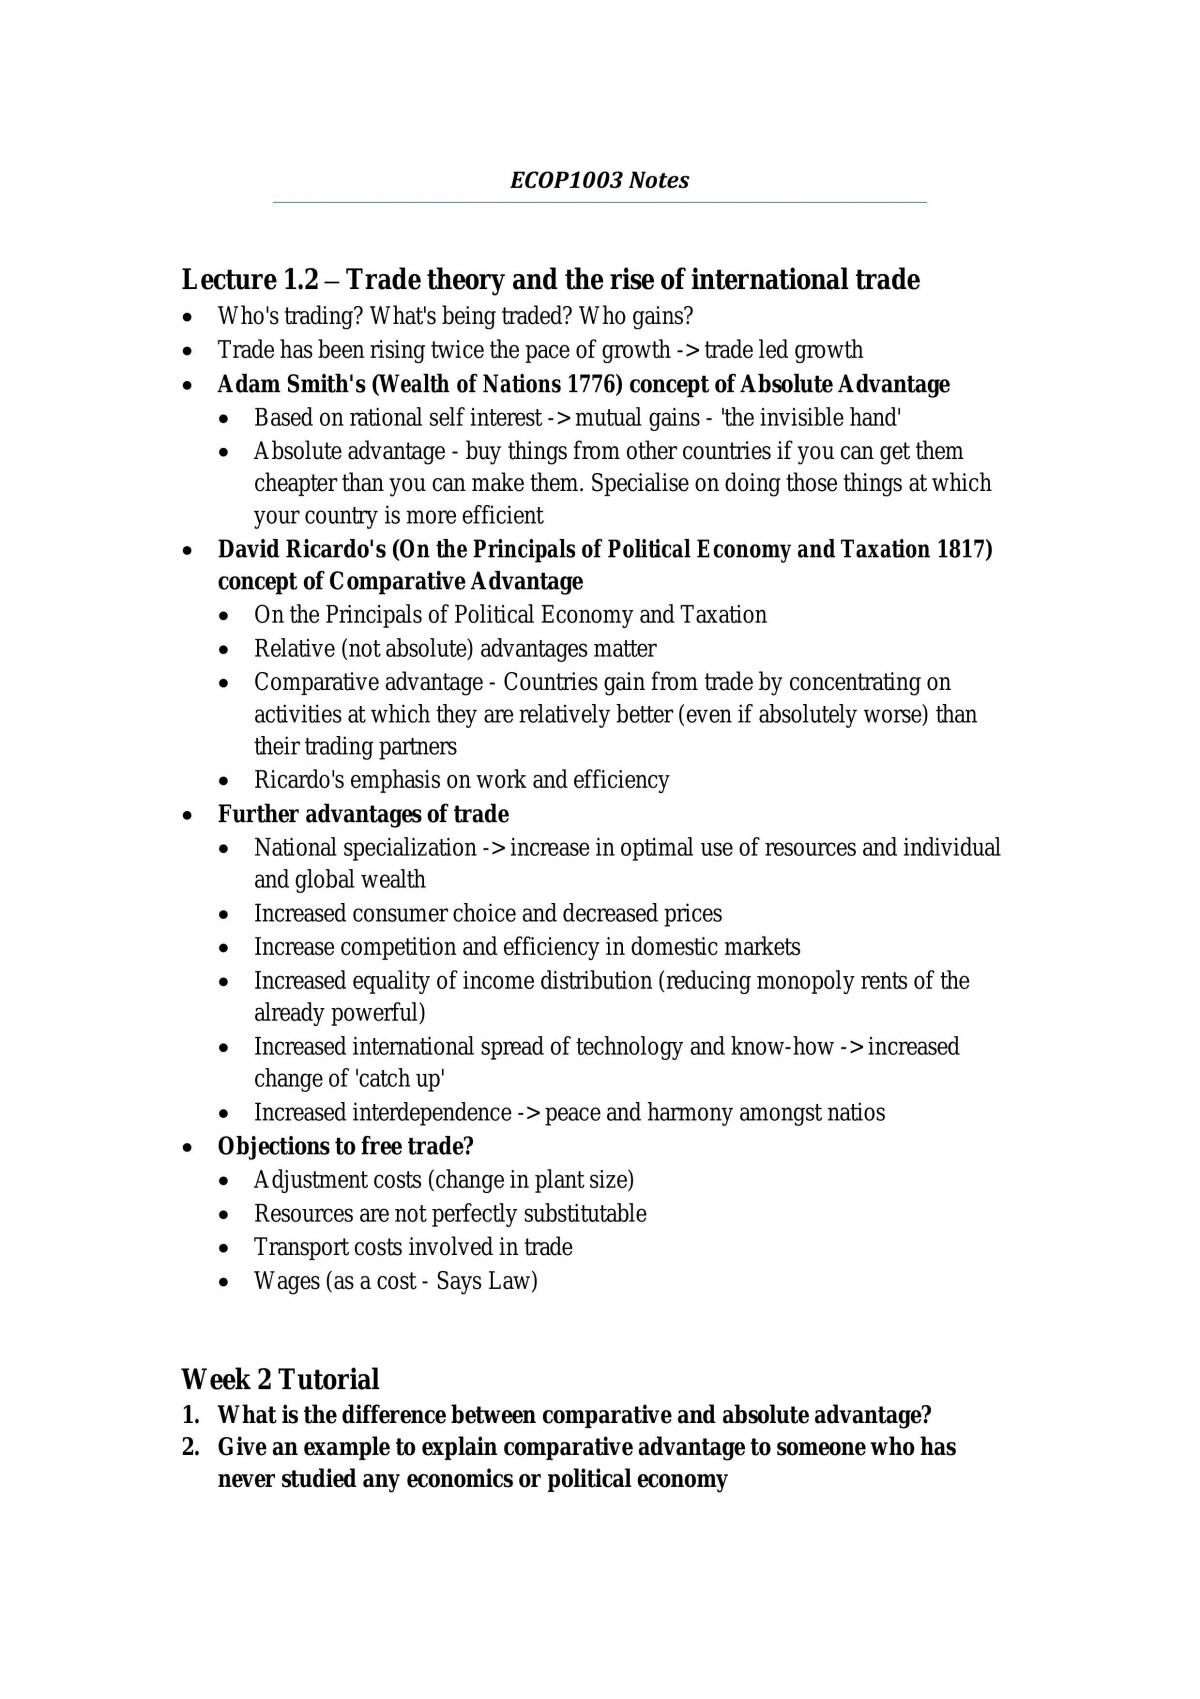 ECOP1003 Course Notes - Page 1